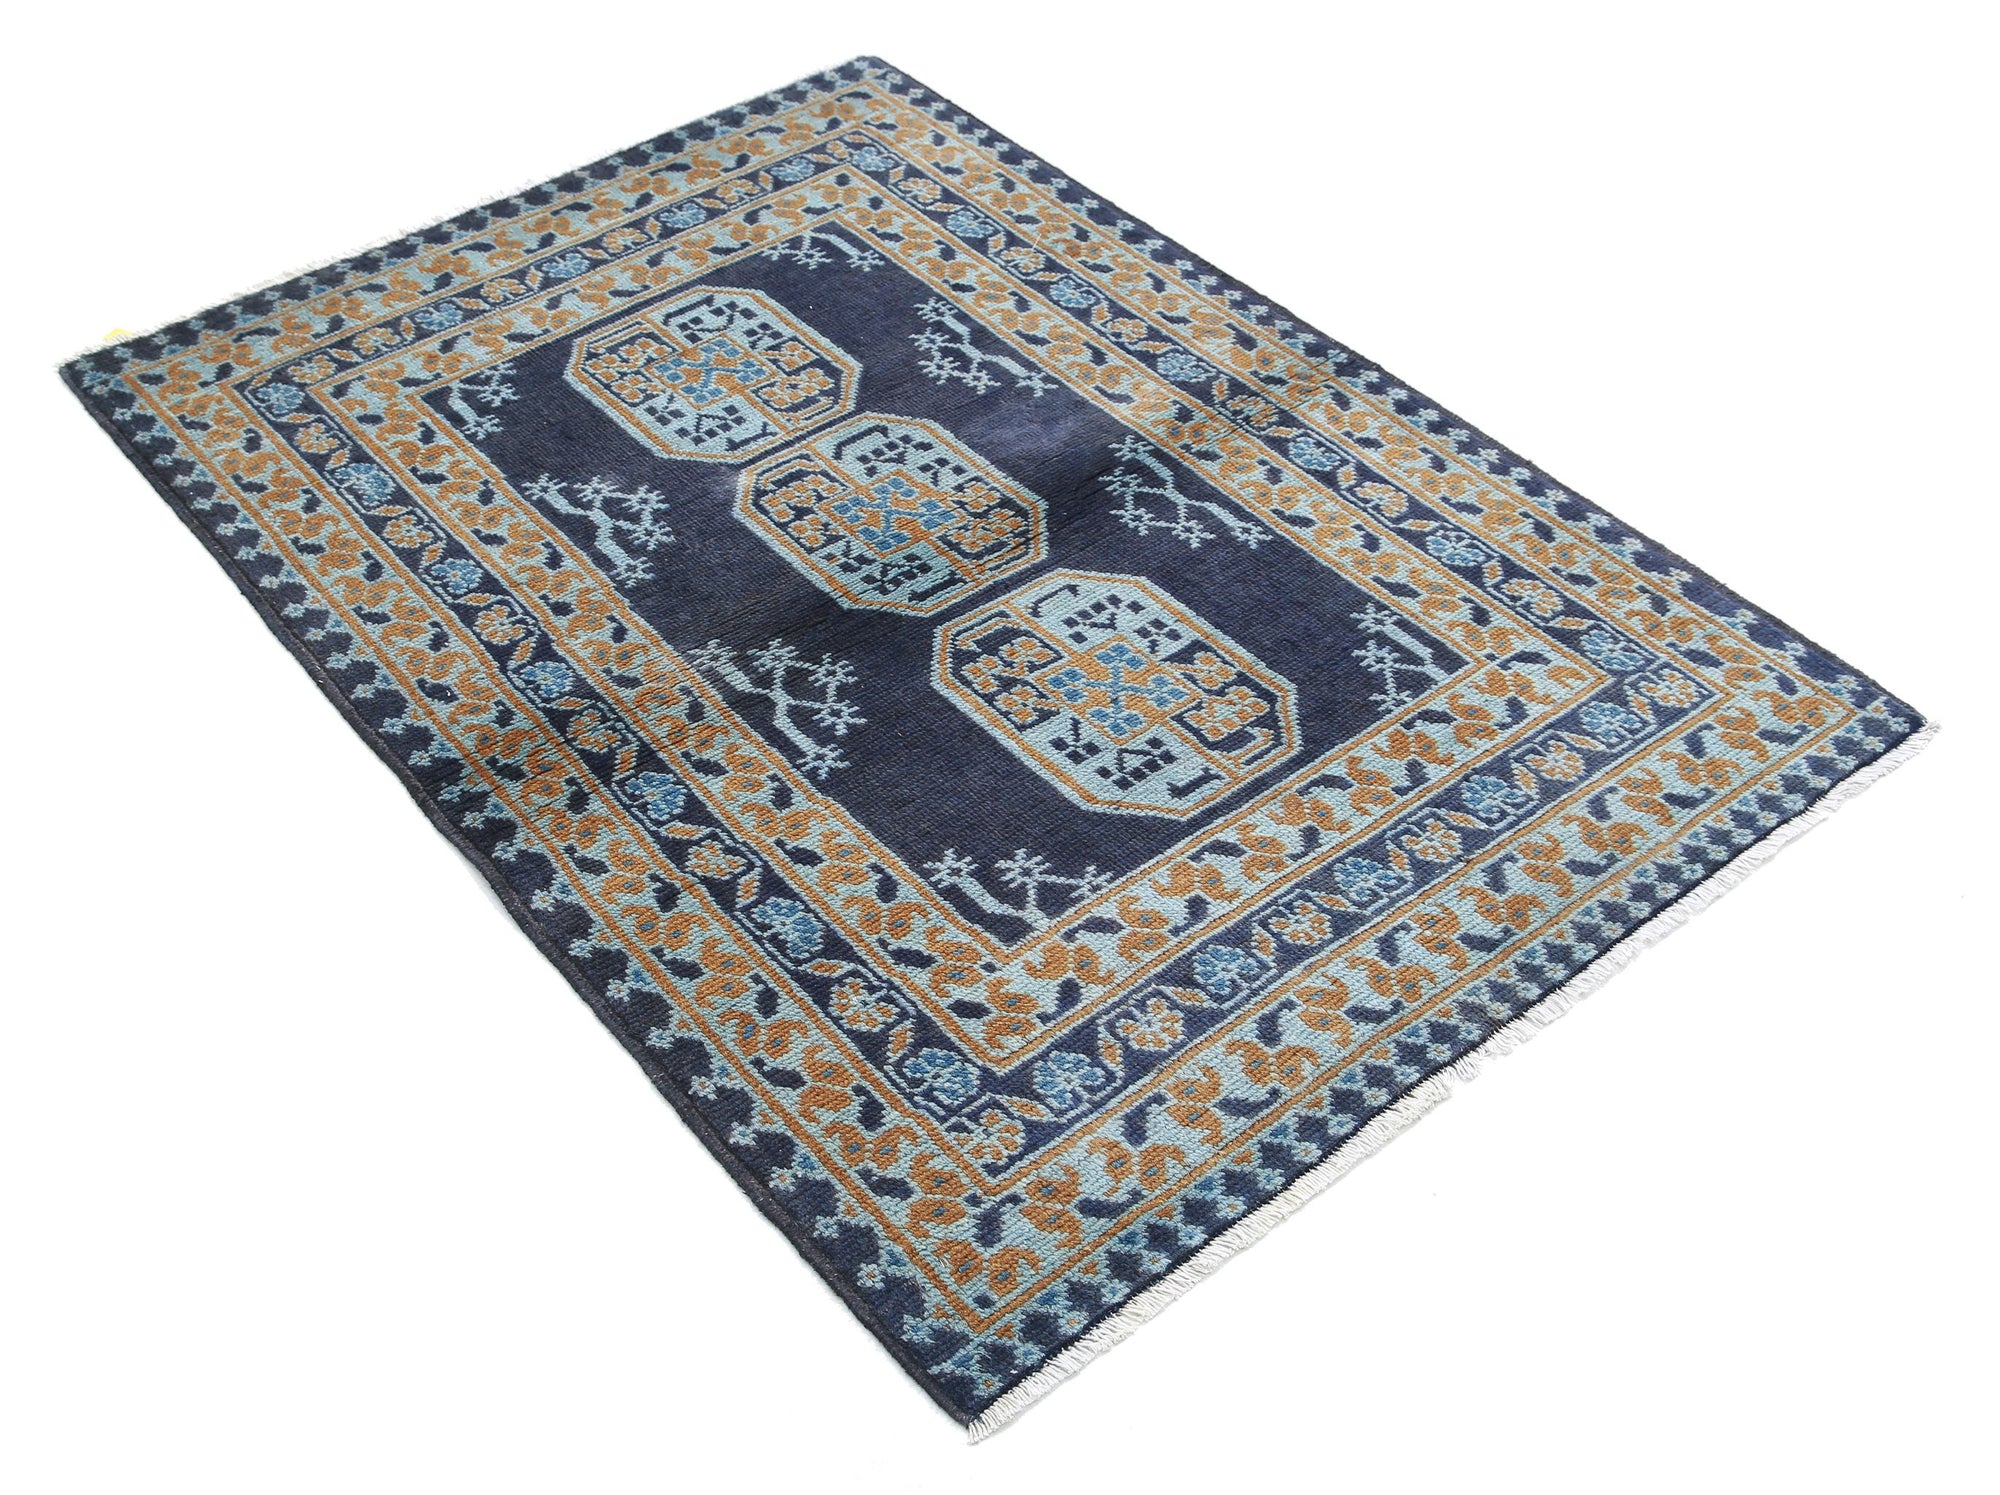 Revival-hand-knotted-gul-collection-wool-rug-5014101-1.jpg